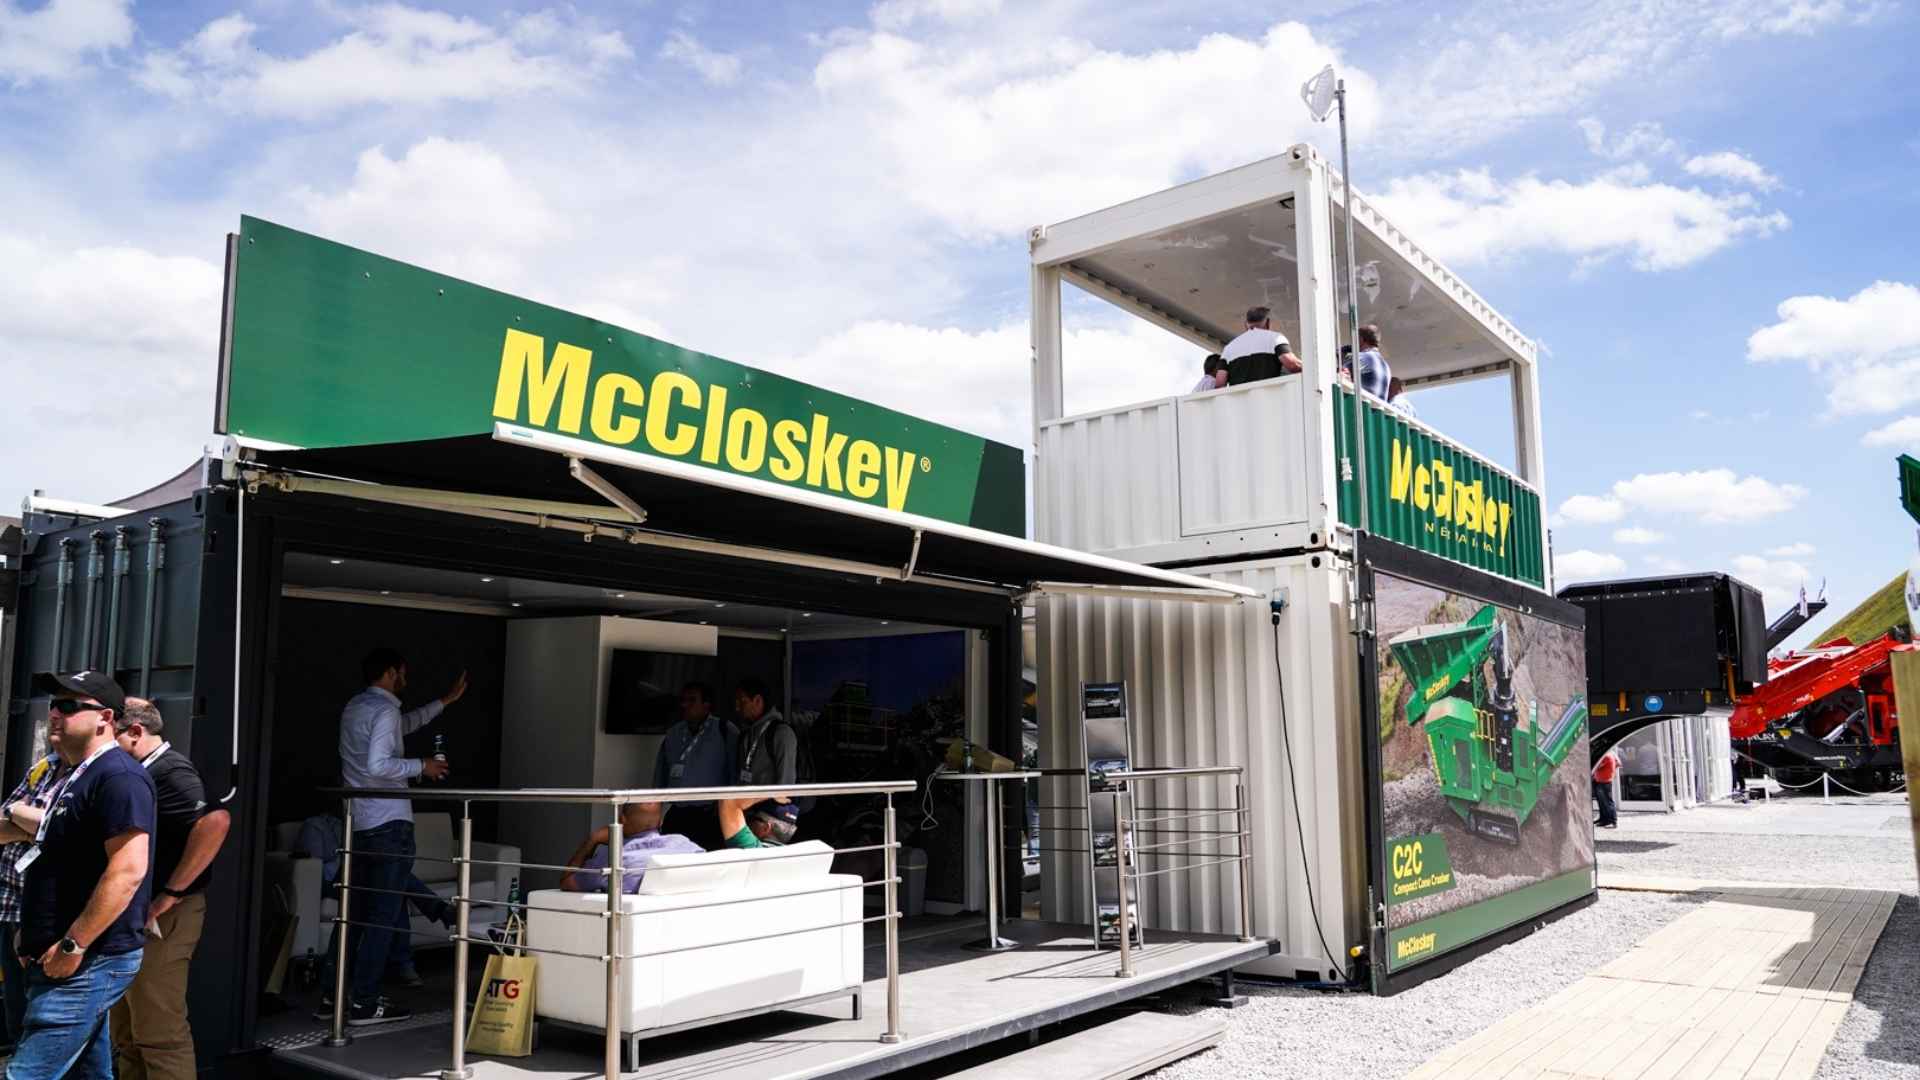 mccloskey exhibition stand at hillhead